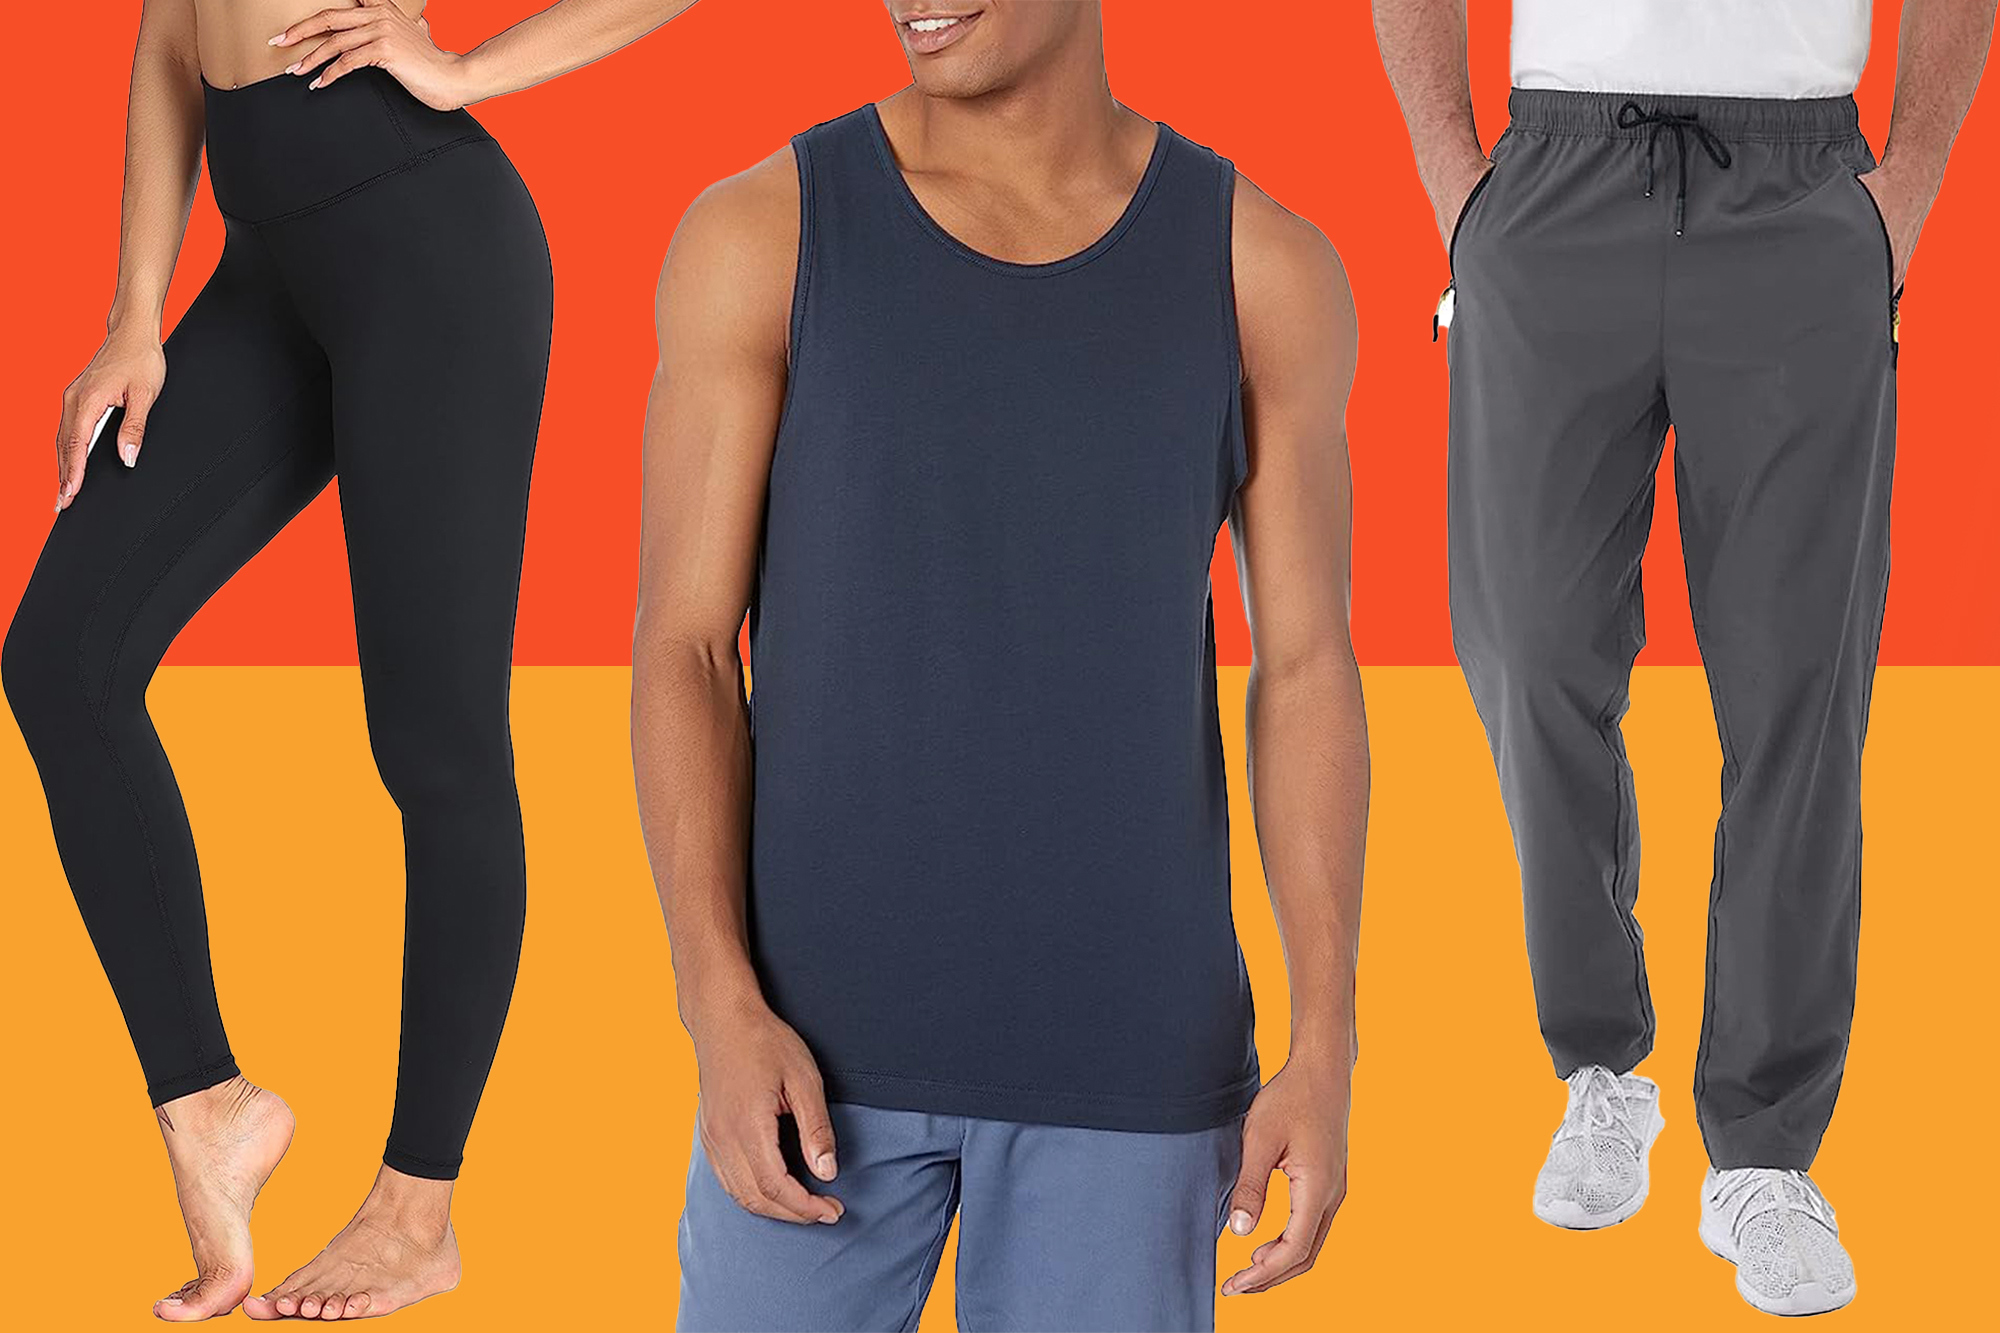 The 30 best Amazon workout clothes under $30 for affordable shopping